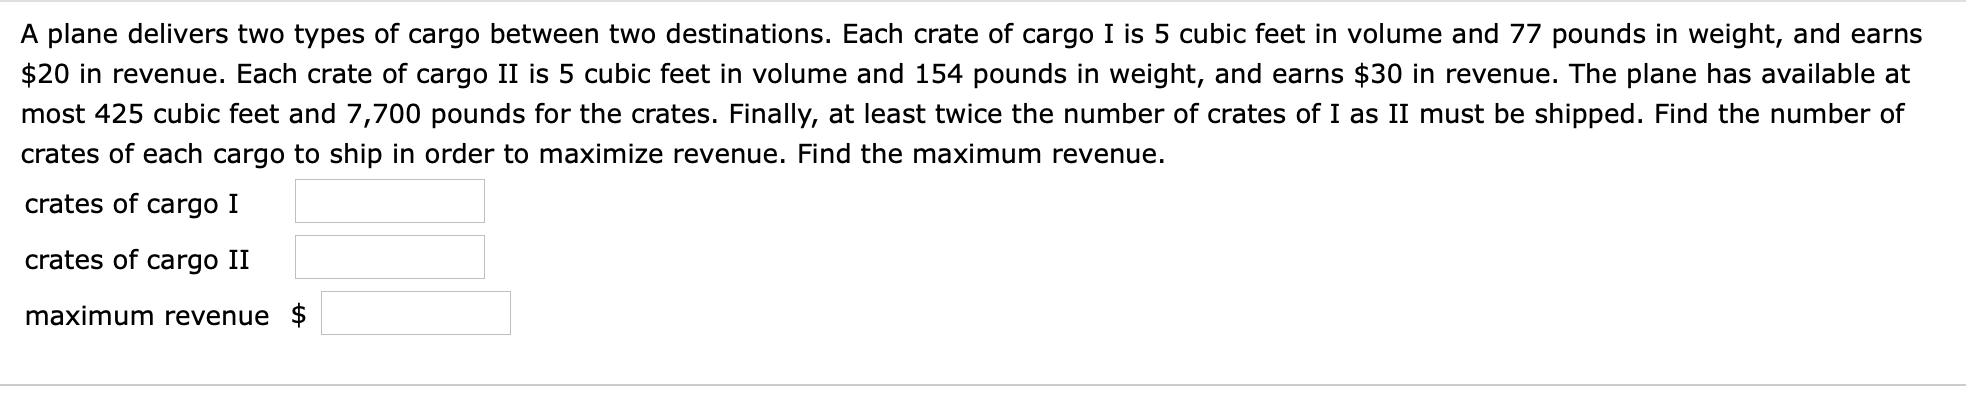 A plane delivers two types of cargo between two destinations. Each crate of cargo I is 5 cubic feet in volume and 77 pounds in weight, and earns
$20 in revenue. Each crate of cargo II is 5 cubic feet in volume and 154 pounds in weight, and earns $30 in revenue. The plane has available at
most 425 cubic feet and 7,700 pounds for the crates. Finally, at least twice the number of crates of I as II must be shipped. Find the number of
crates of each cargo to ship in order to maximize revenue. Find the maximum revenue
crates of cargo I
crates of cargo II
maximum revenue $
